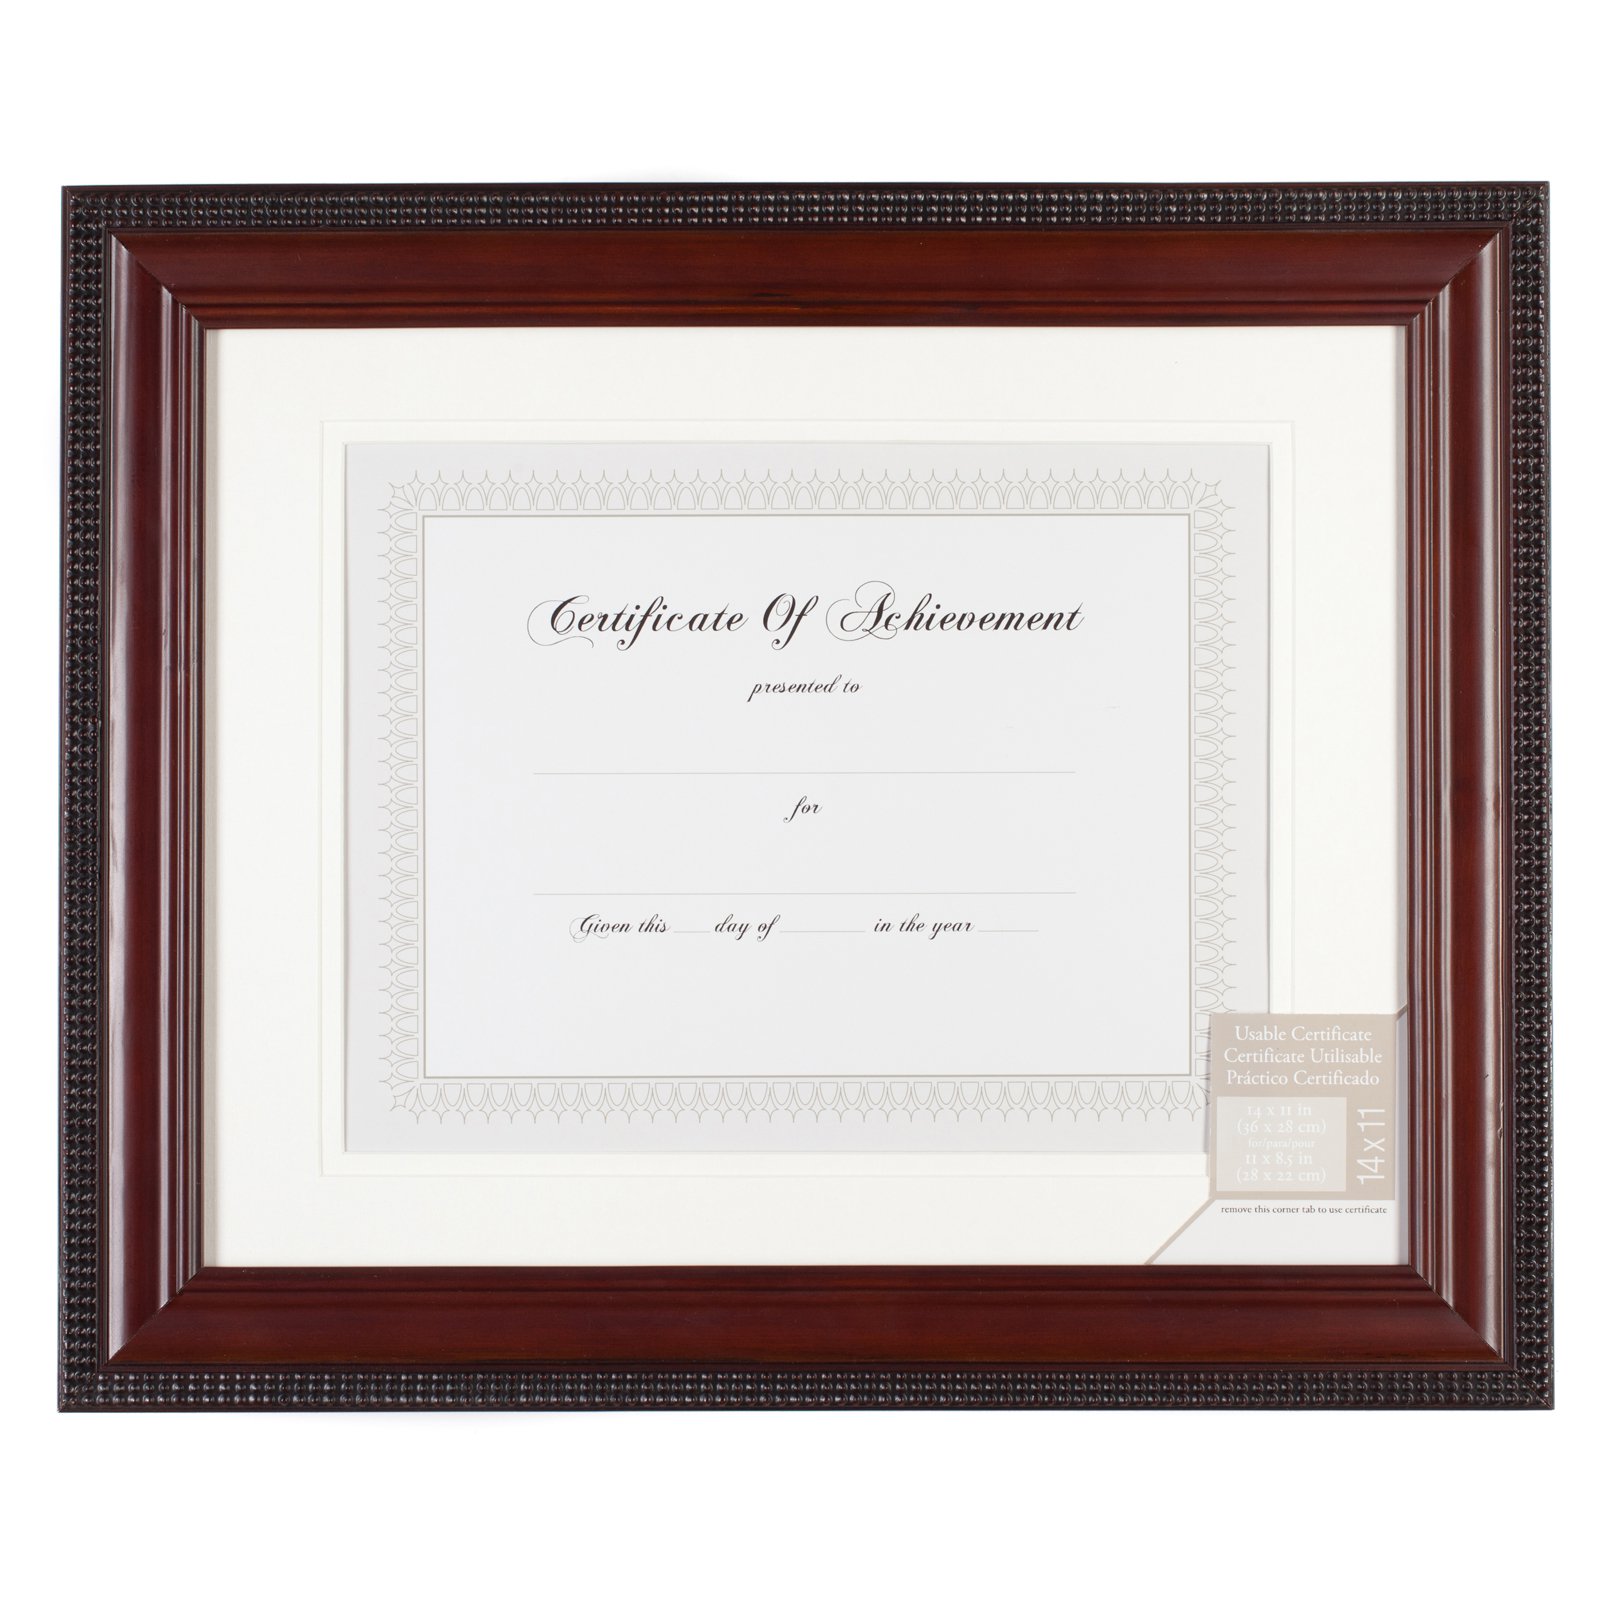 Nielsen Bainbridge Gallery Solutions with Bead Document Wall Picture Frame - Mahogany - image 1 of 3